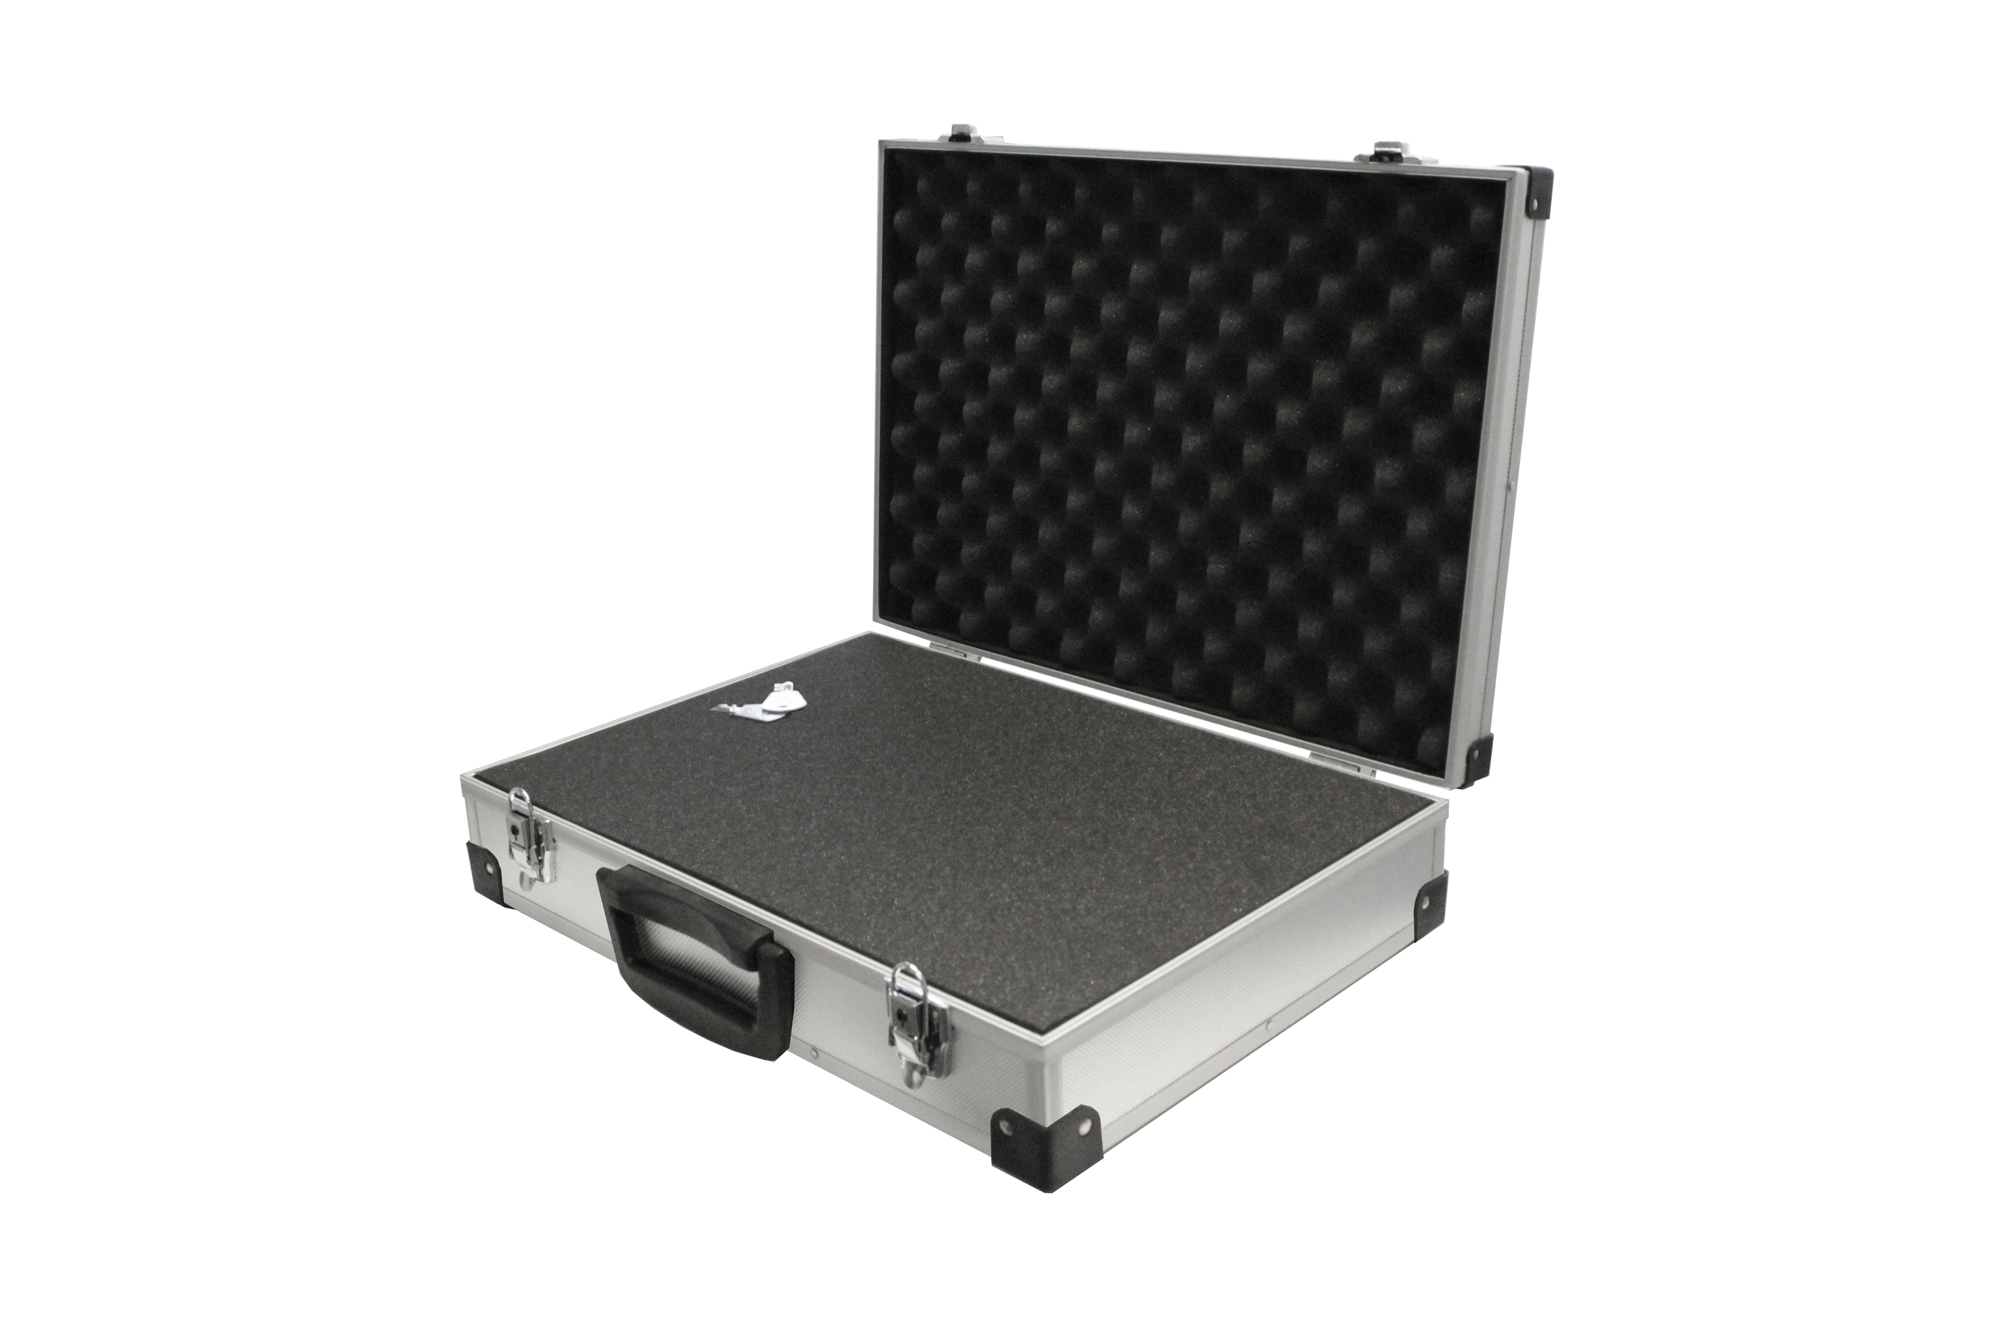 «PeakTech® P 7265» Carrying Case for Measurement Instruments